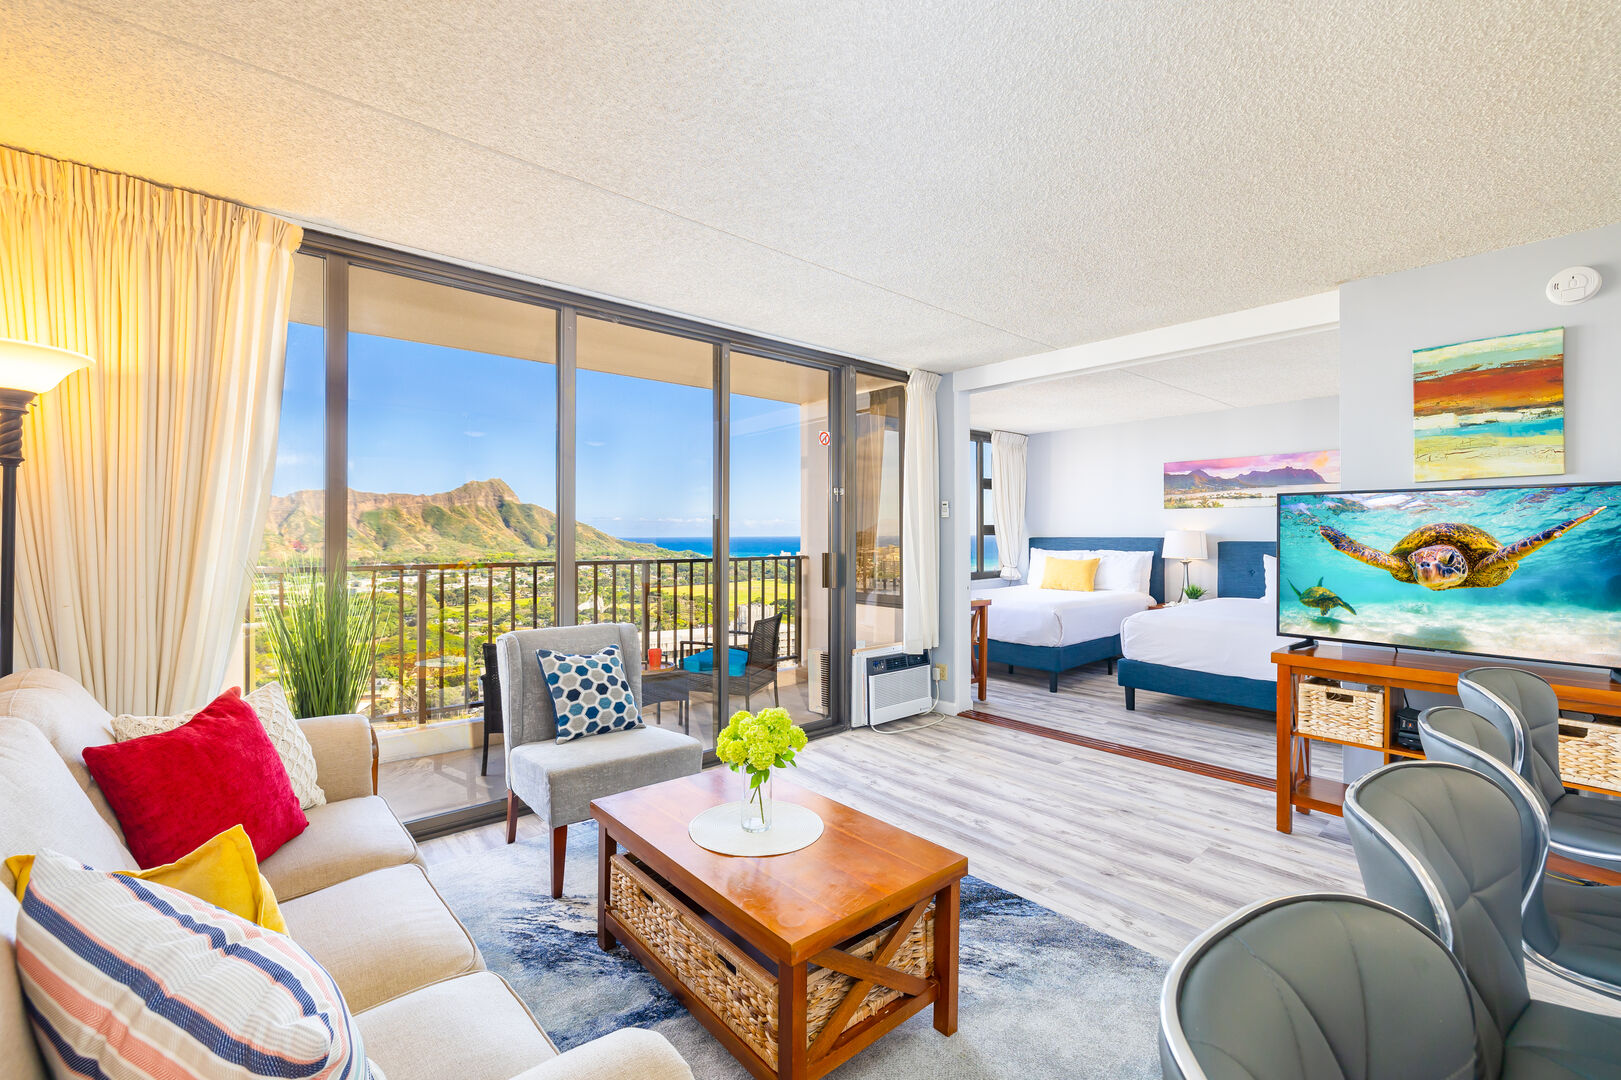 Beautiful Ocean and Diamond Head views from everywhere in the condo.